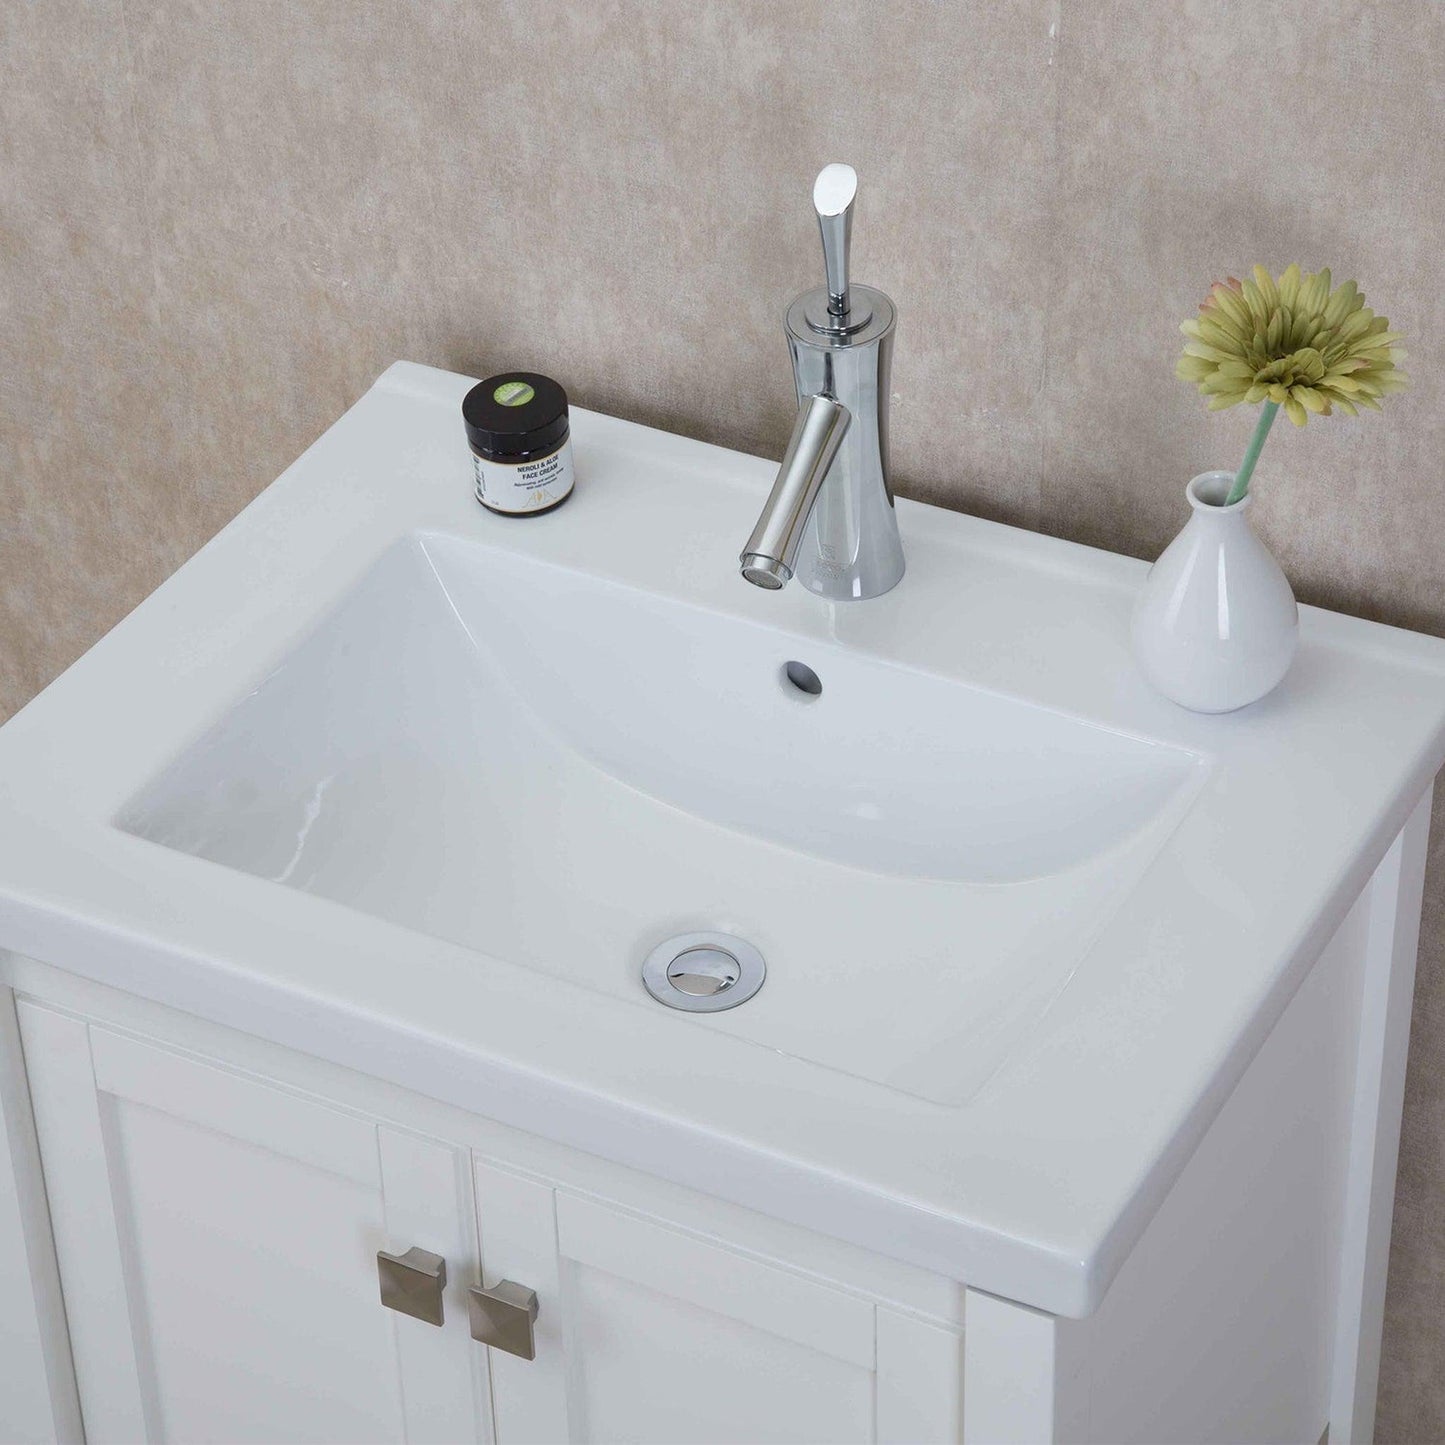 Eviva Tiblisi 24" x 34" White Freestanding Bathroom Vanity With White Integrated Porcelain SInk